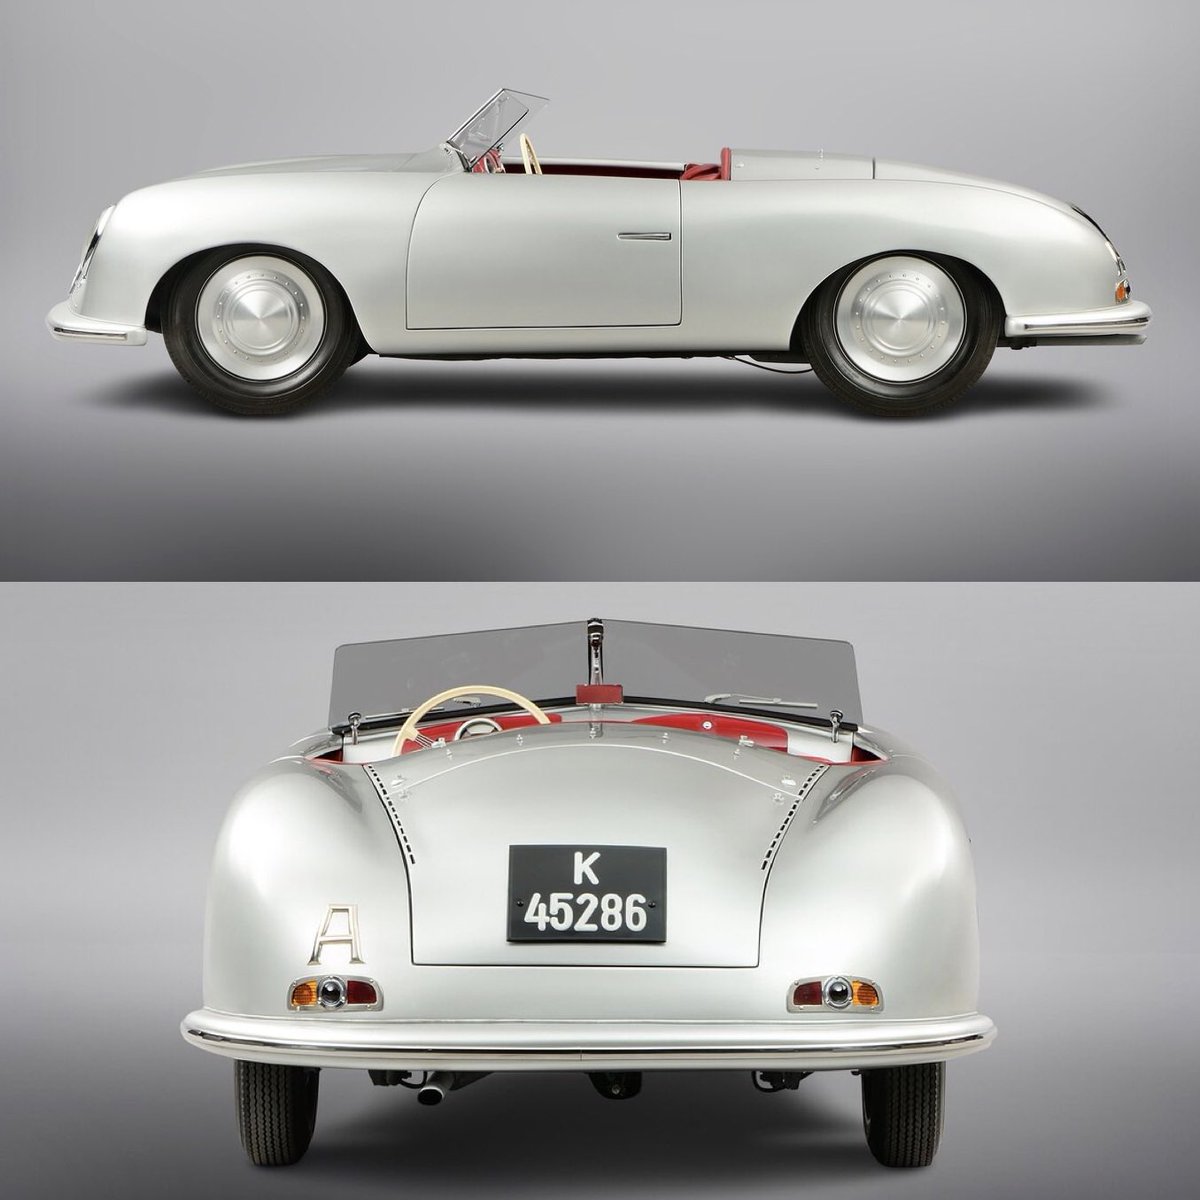 Today marks the 75 day countdown until Porsche officially turns 75 on June 8, 2023.

On June 8, 1948, the 356 “No. 1” Roadster received its general operating permit and the Porsche brand was born.

#drivenbydreams #75YearsPorsche #FerryPorsche #Porsche356 #TorontoPorsche